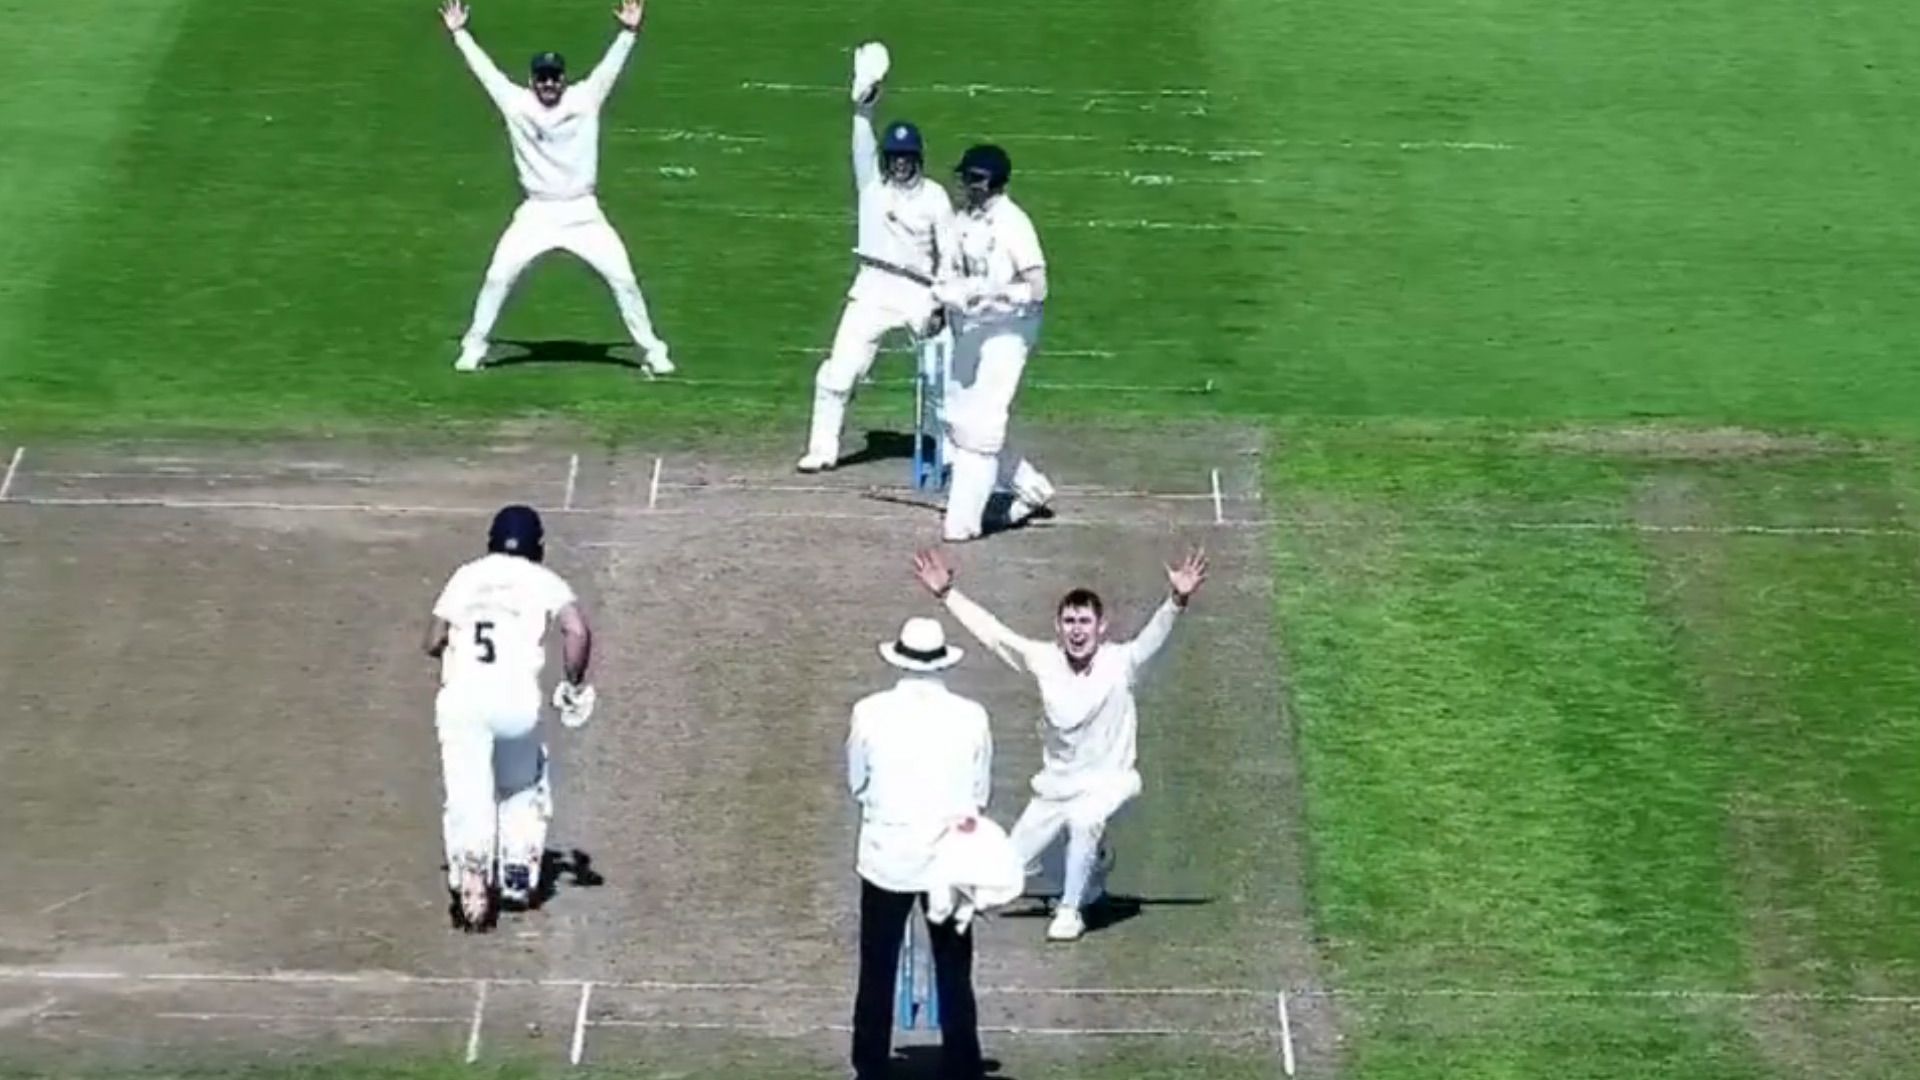 Marnus Labuschagne appeals for LBW while playing in the County Championship second division for Glamorgan.